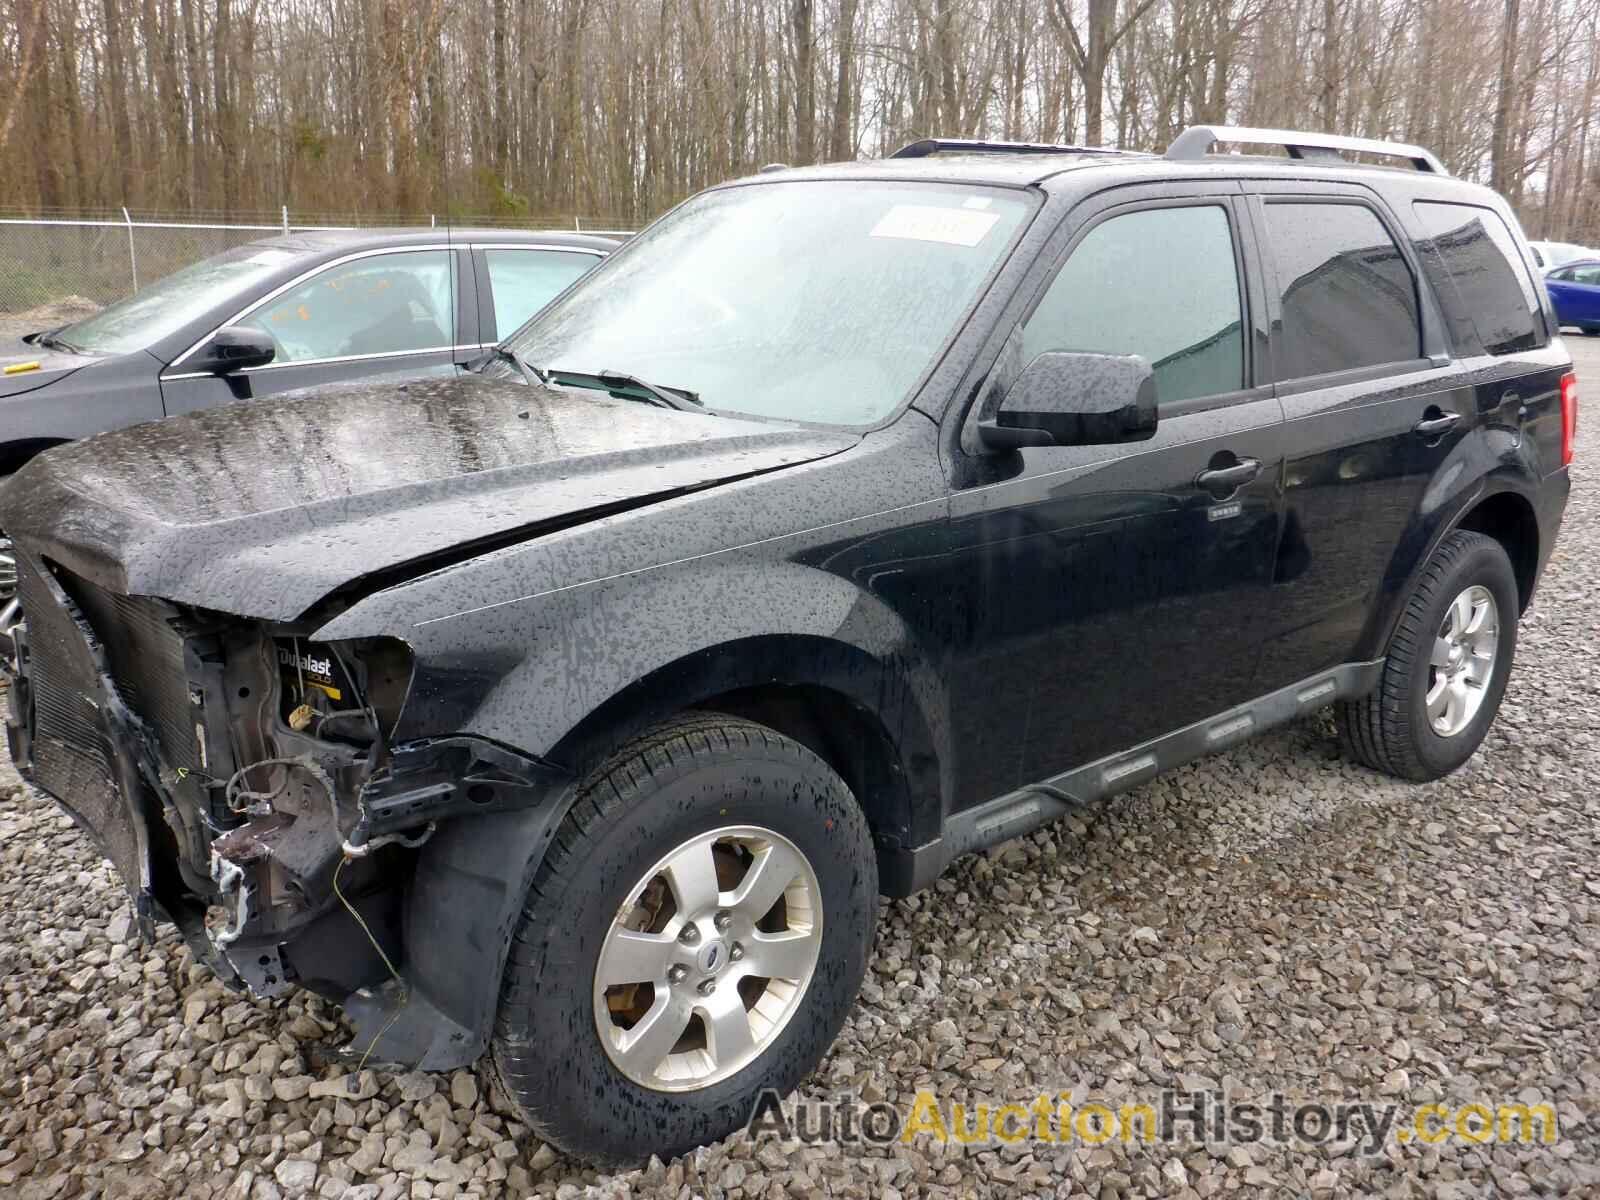 2009 FORD ESCAPE LIMITED, 1FMCU94G69KB96942